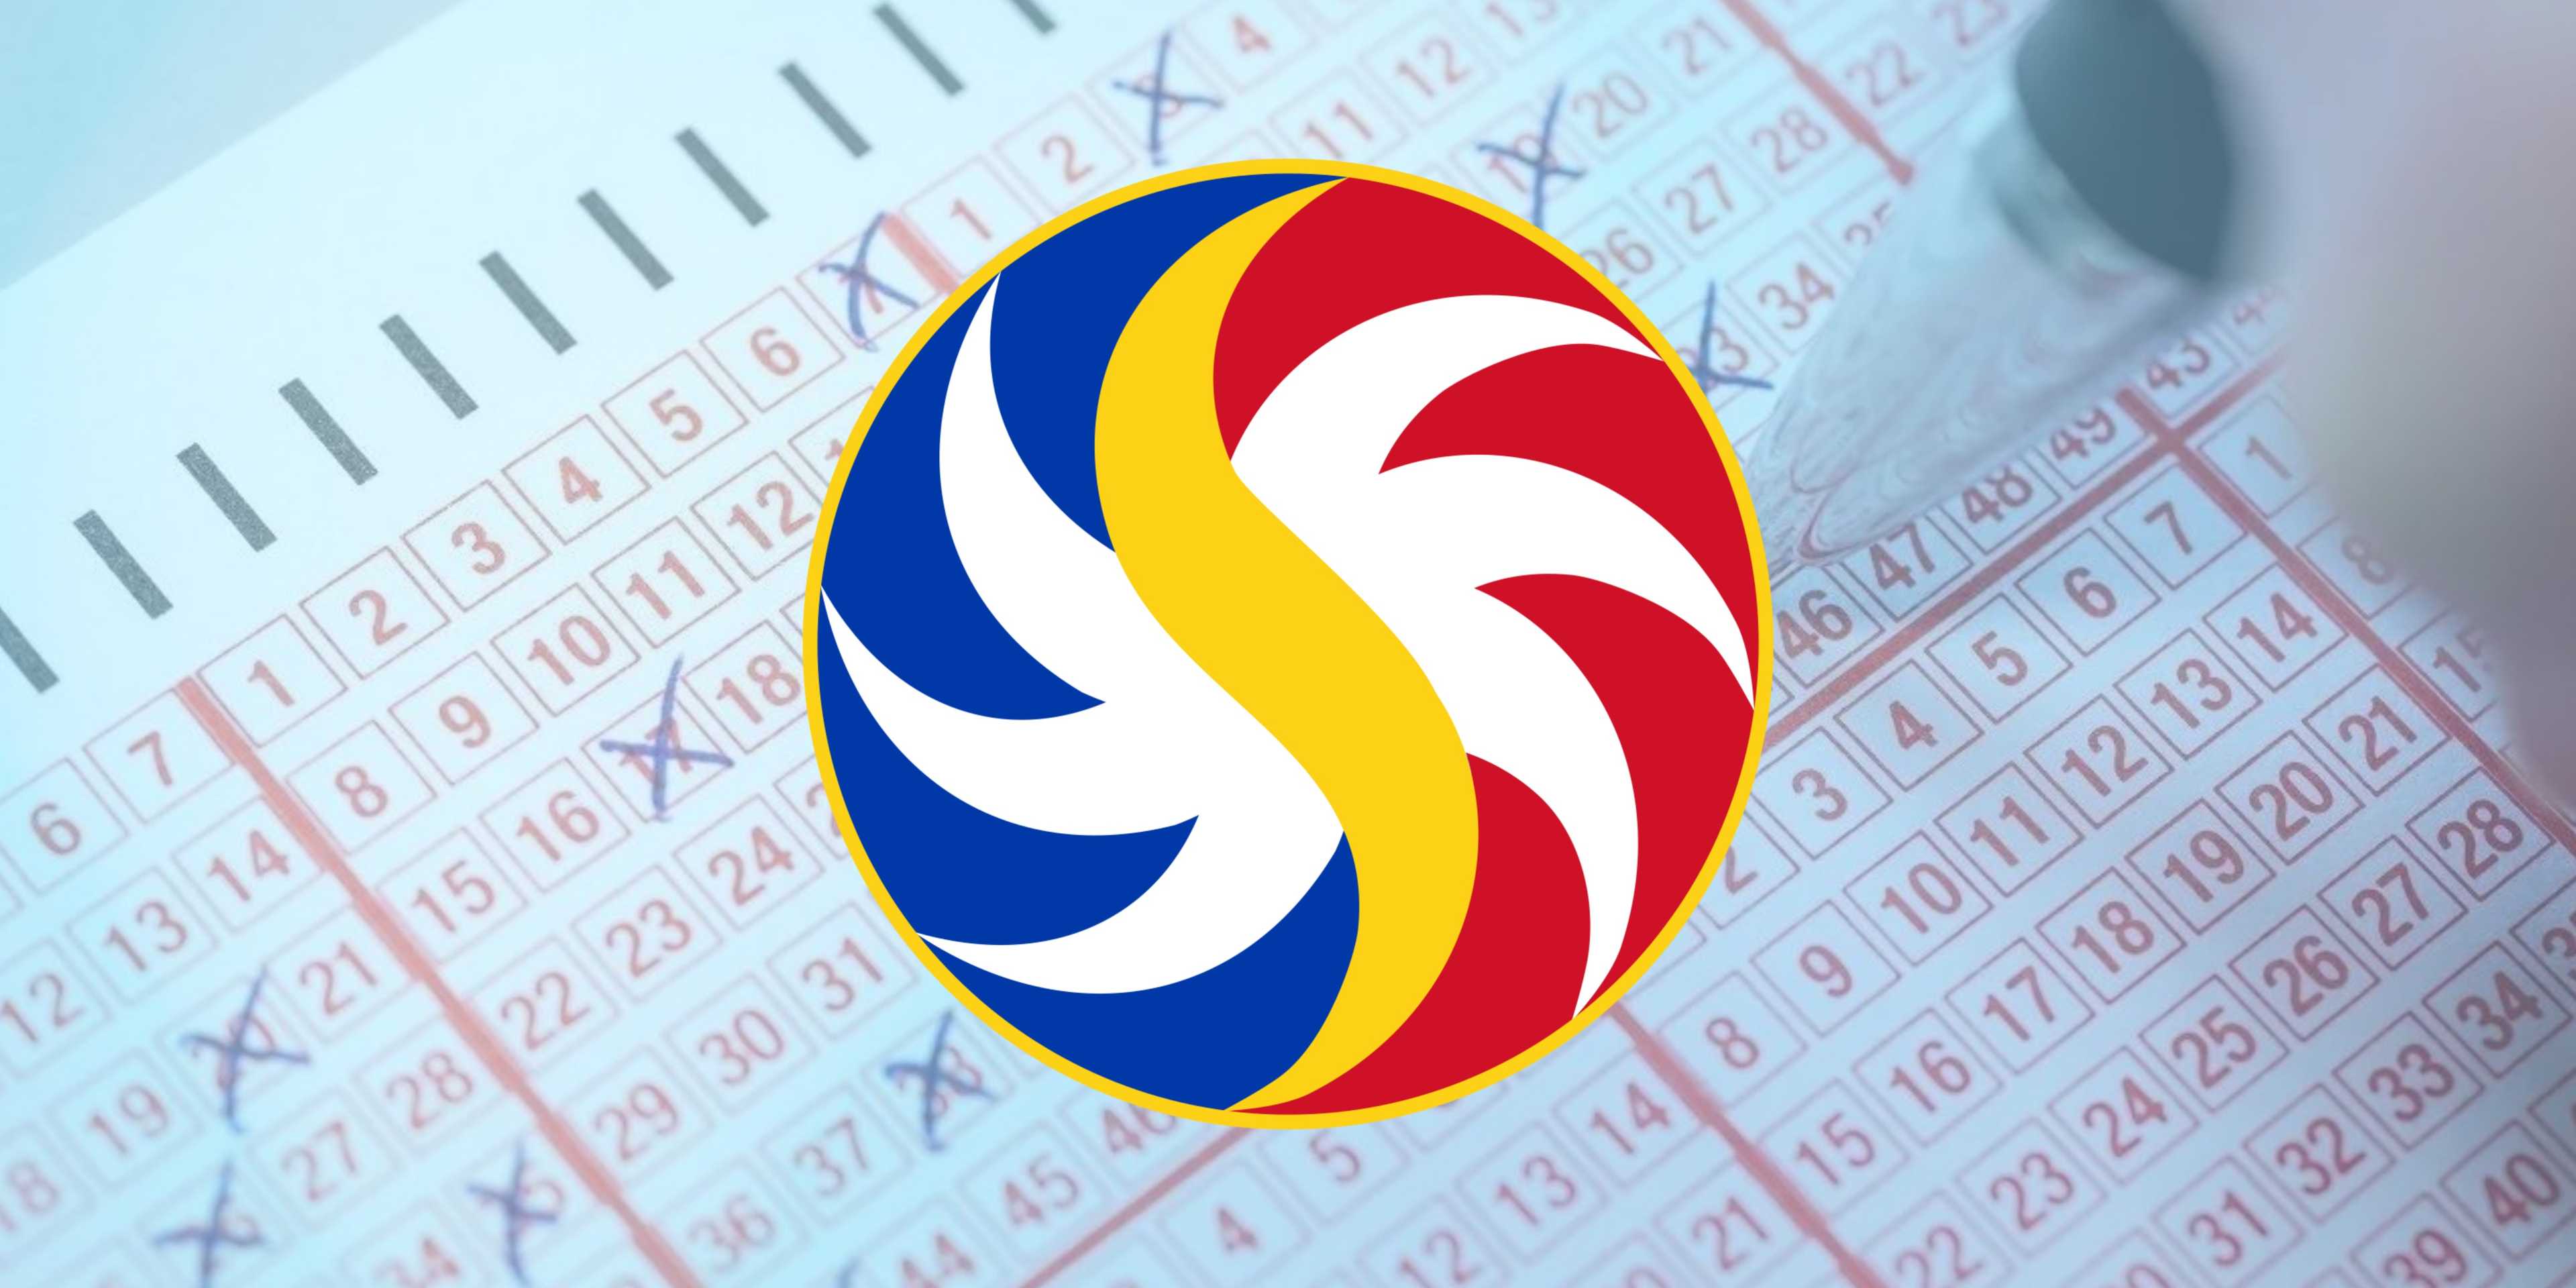 PCSO Lotto Draw Results on Saturday, March 9